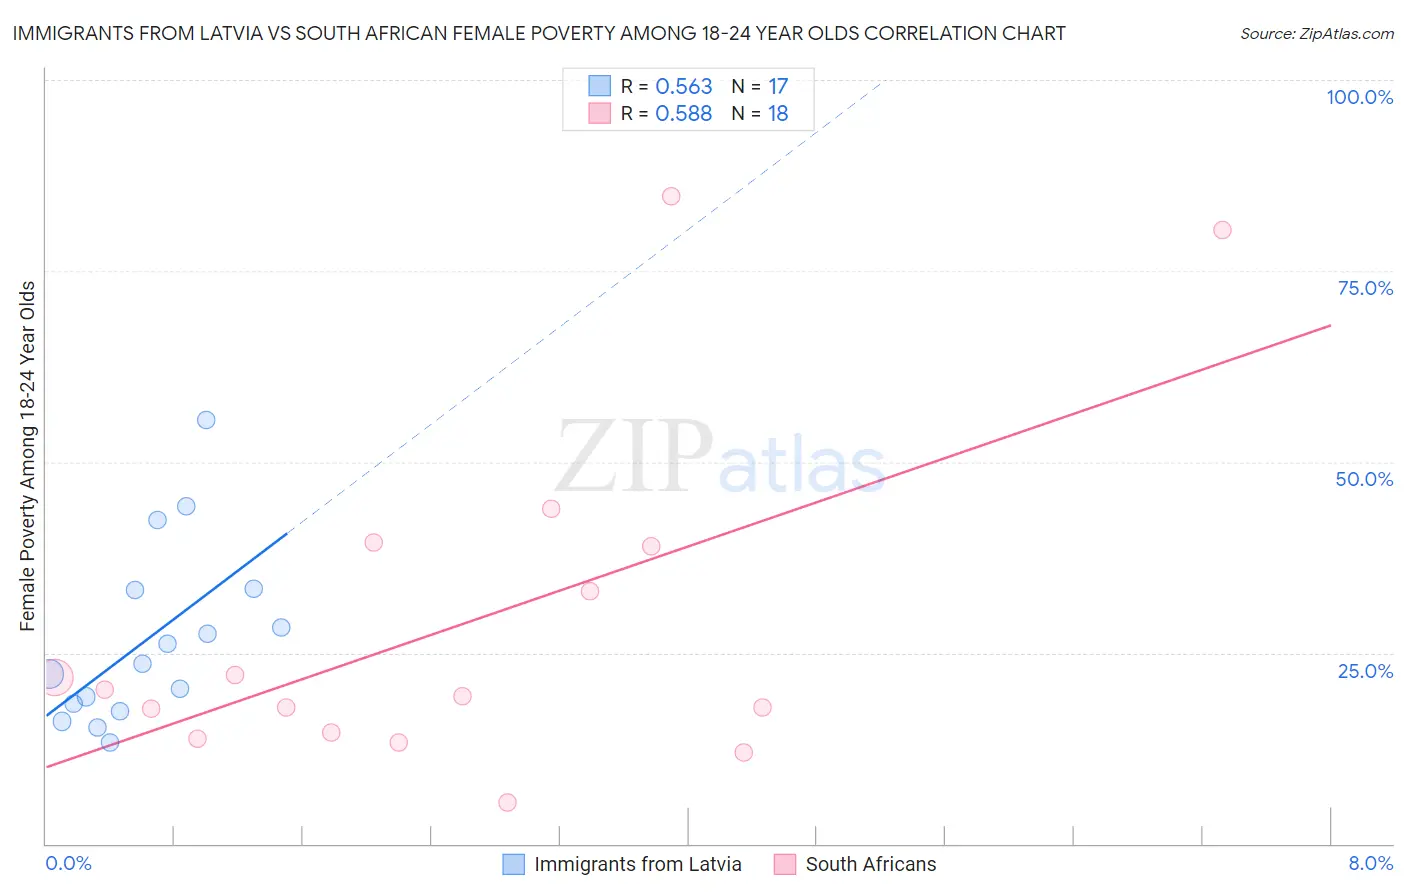 Immigrants from Latvia vs South African Female Poverty Among 18-24 Year Olds